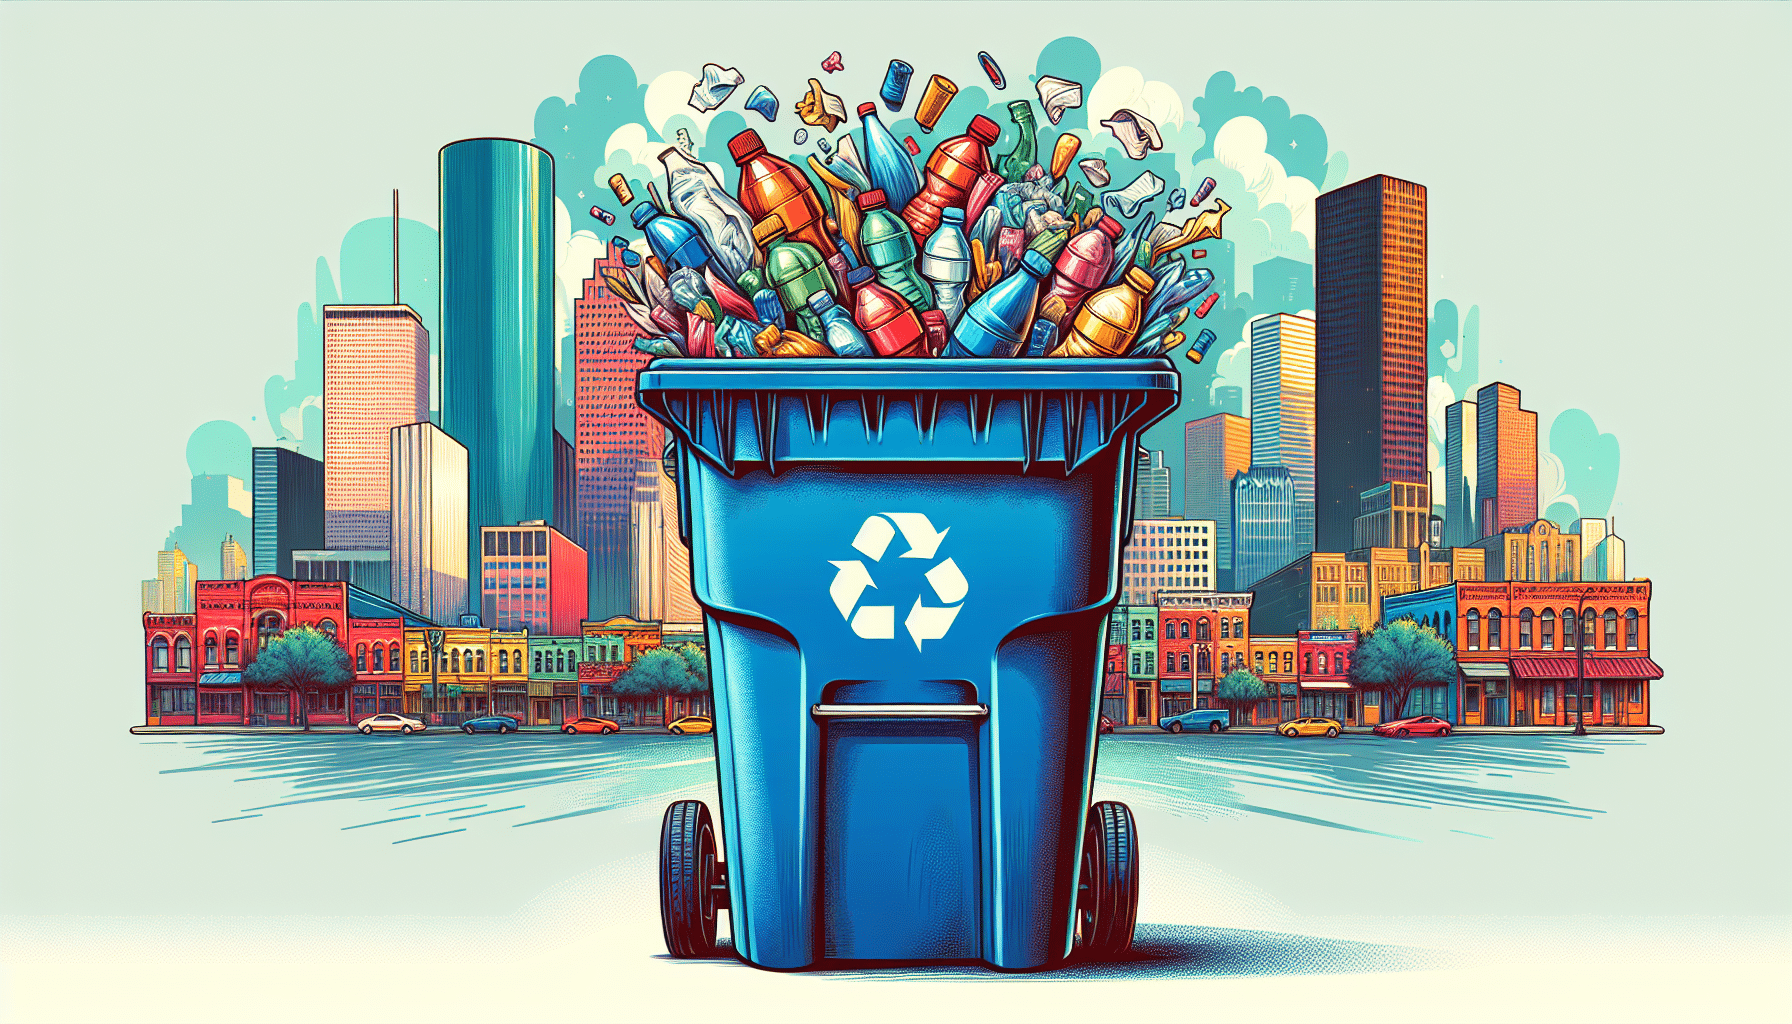 Illustration of a recycling bin with various recyclable items